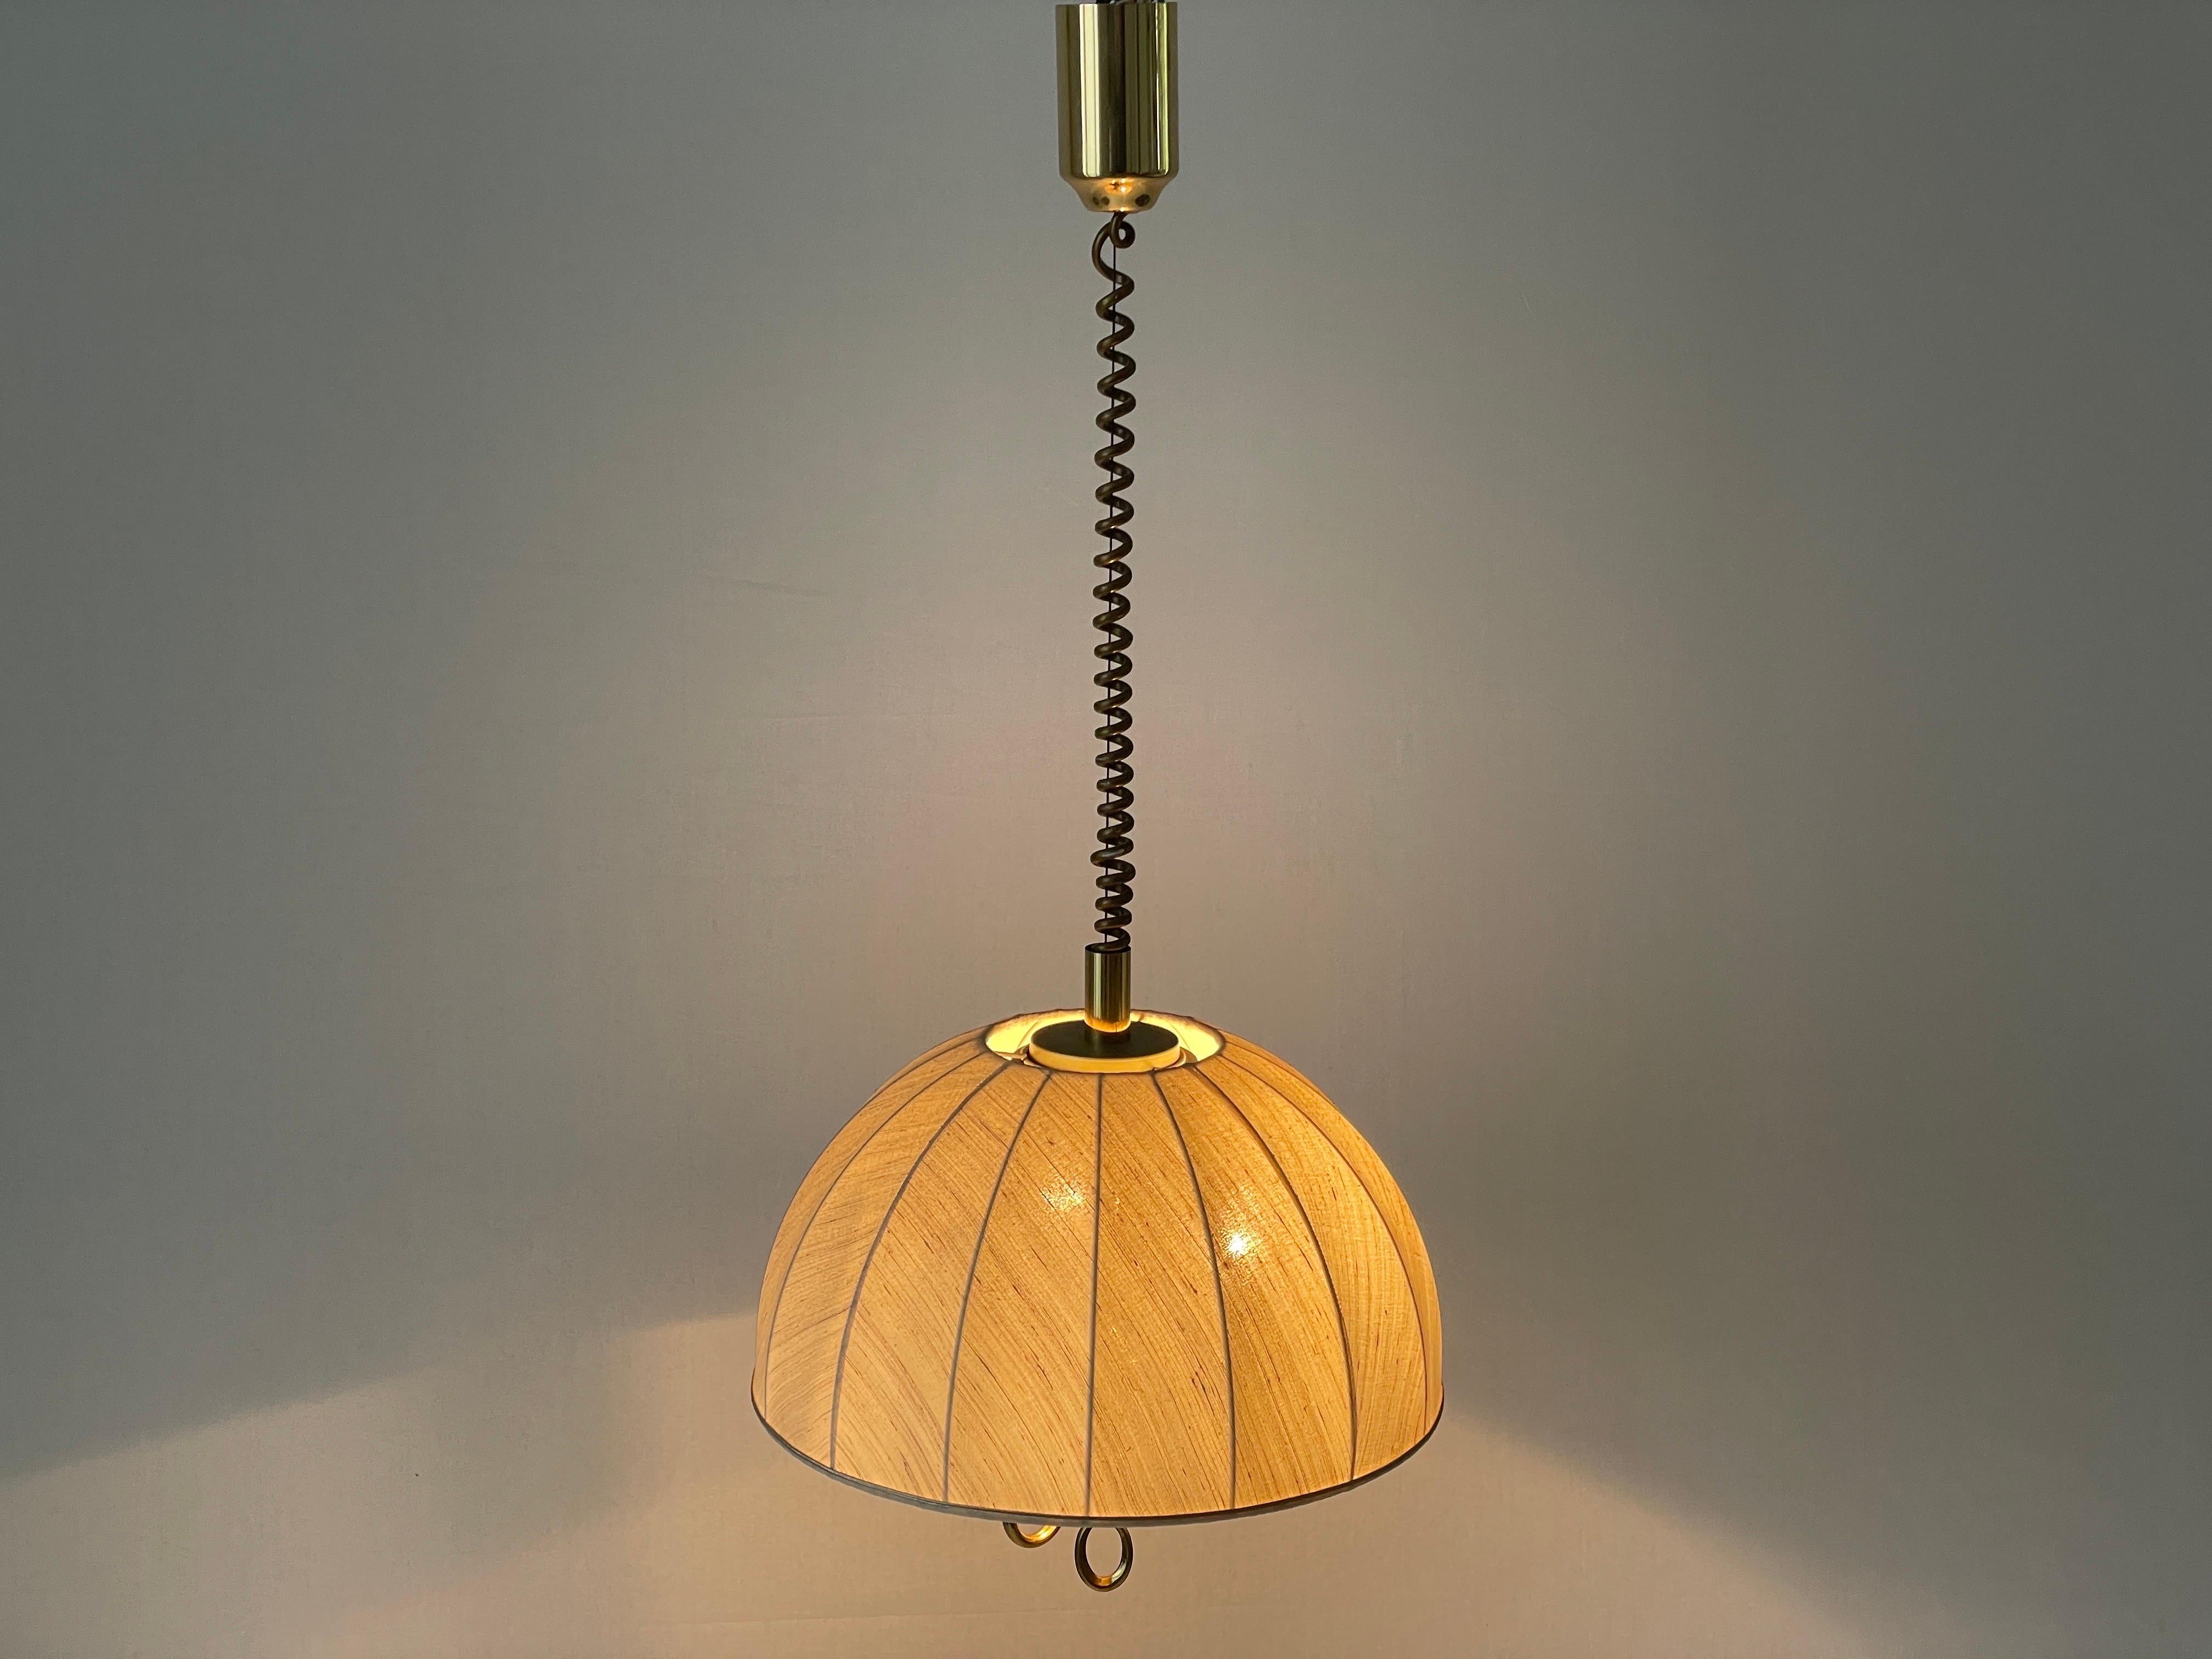 Fabric and Brass 3 socket Adjustable Shade Pendant Lamp by WKR, 1970s, Germany For Sale 7